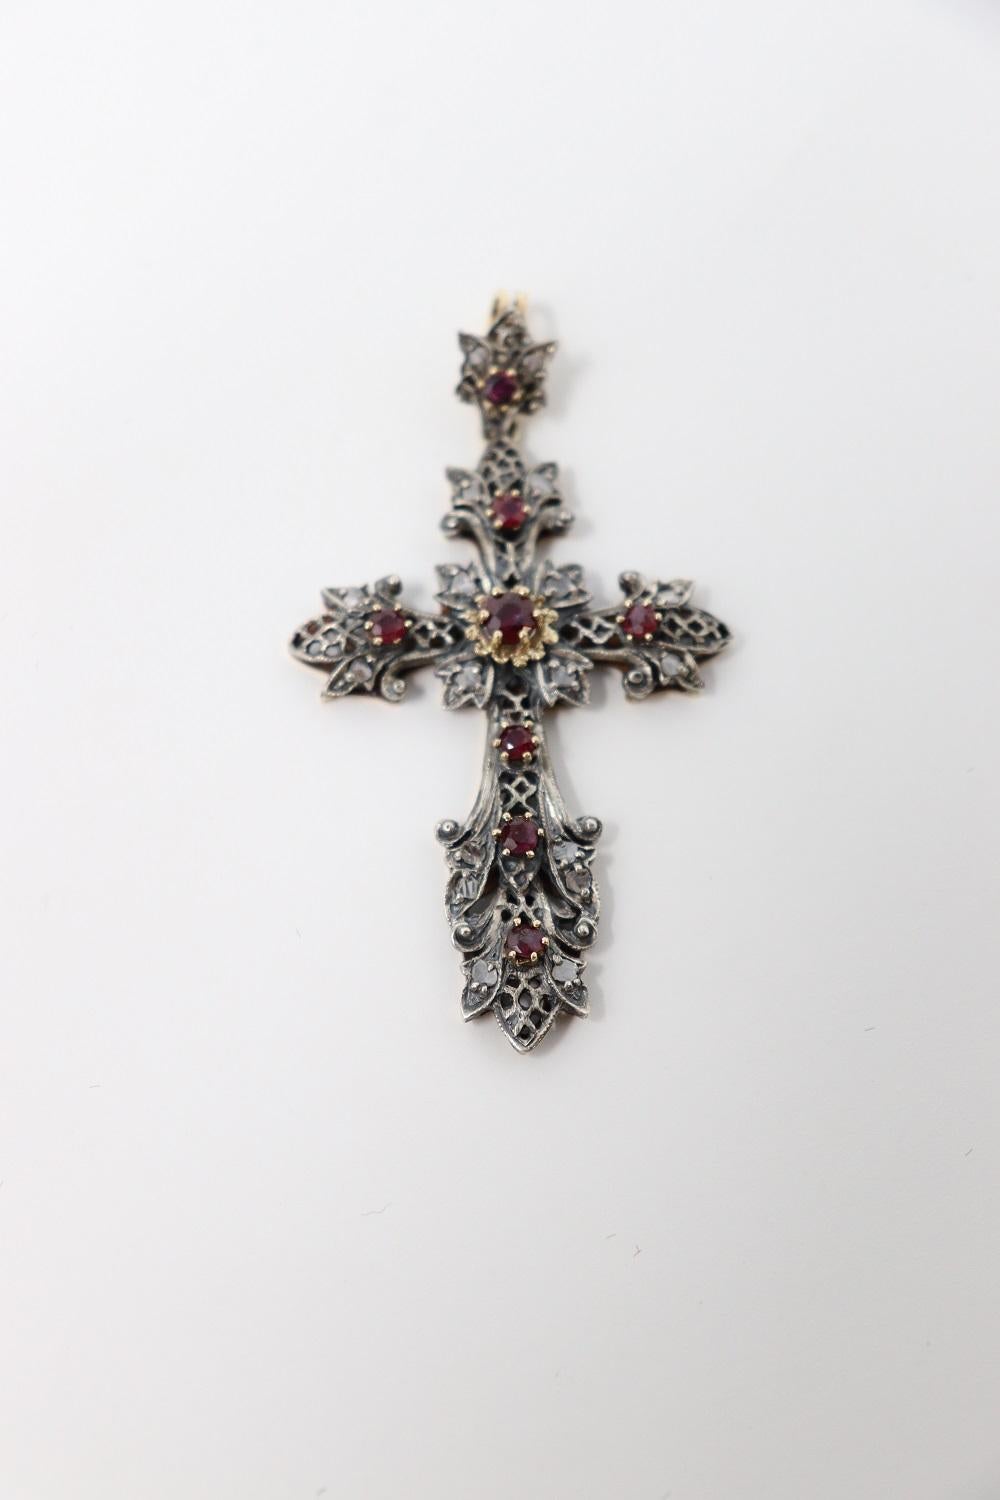 gold cross with rubies